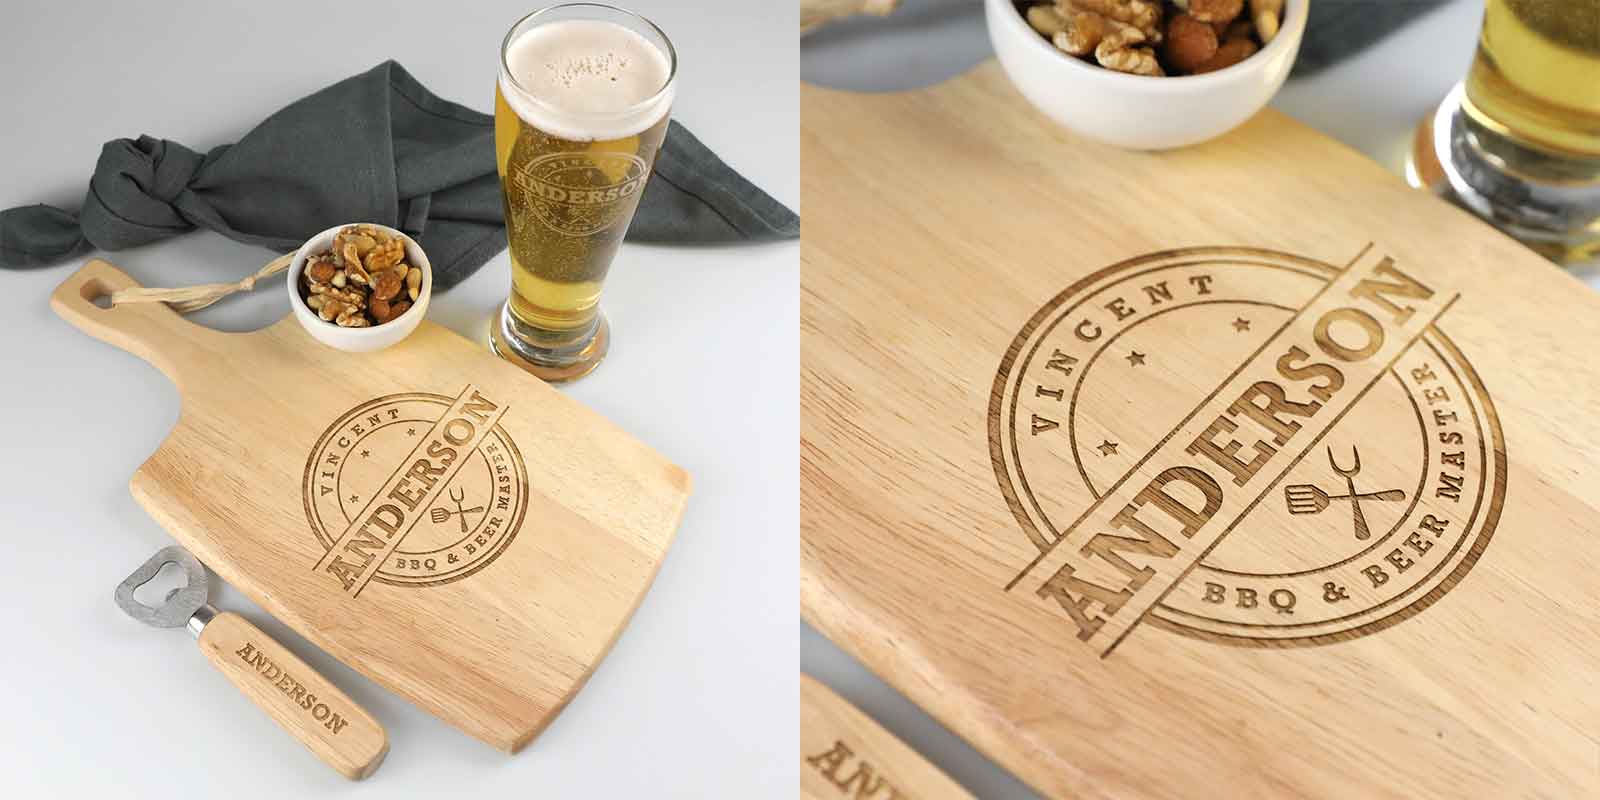 Father's Day BBQ Master Hamper - Engraved Wooden Paddle Board, Wooden Bottle Opener and 425ml Beer Glass